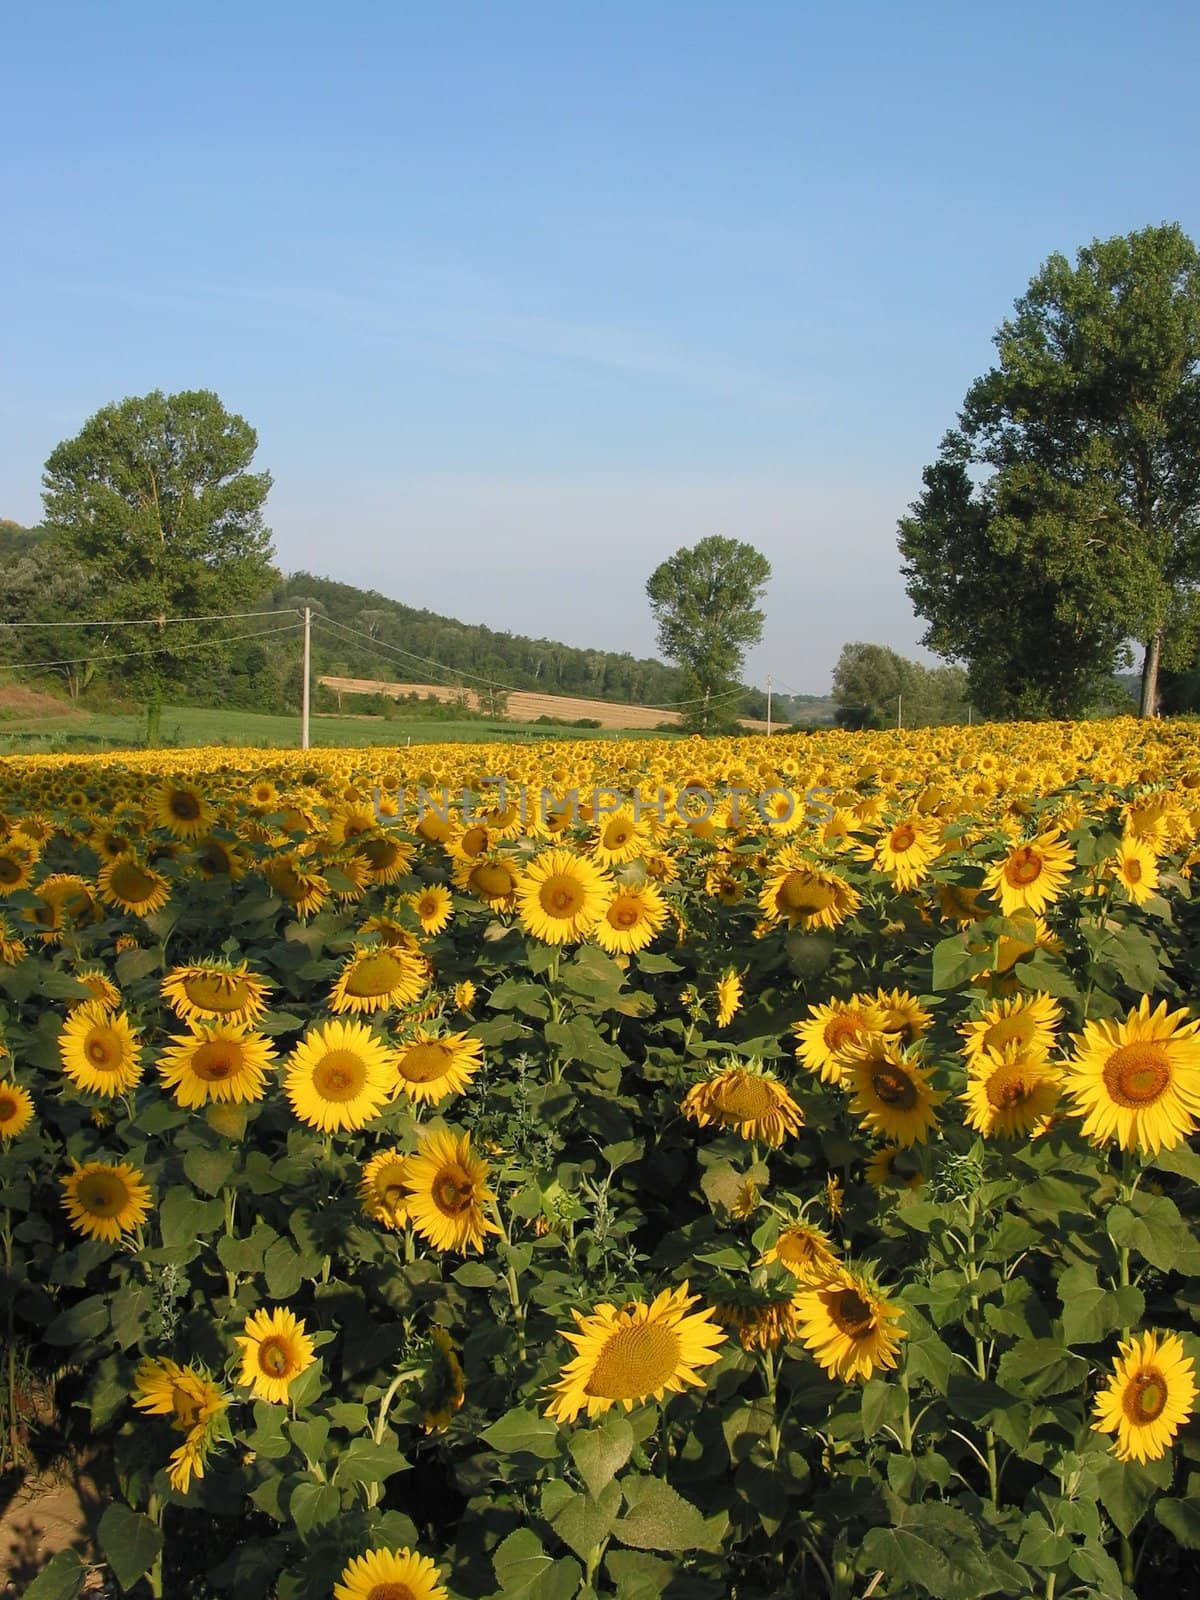 A beautiful sun flower field during summer, in Italy